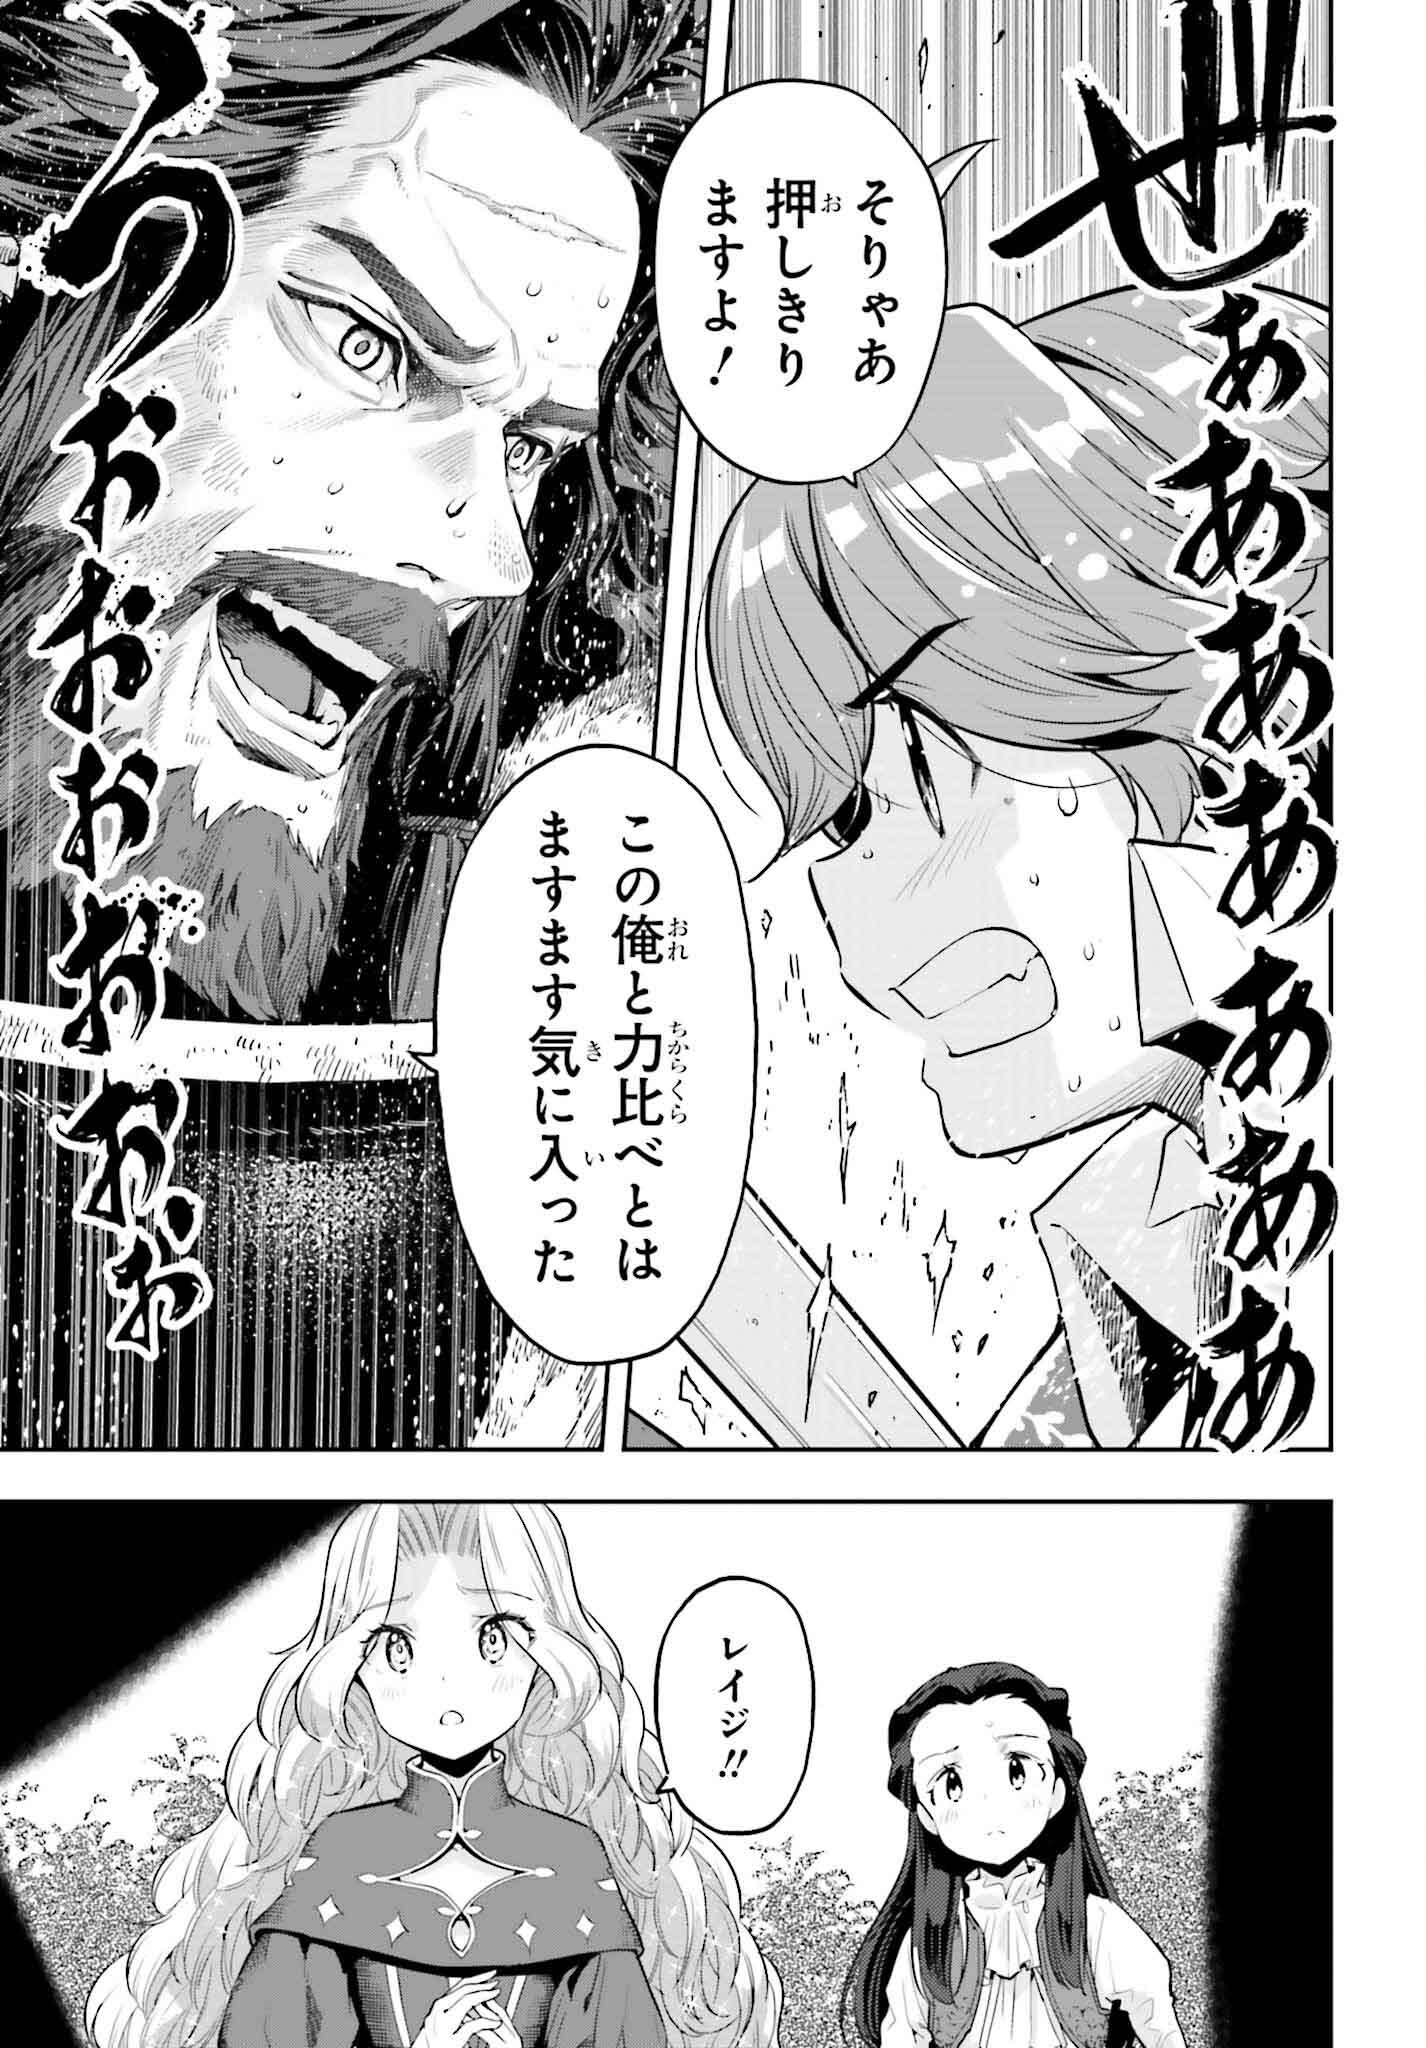 Only the Reincarnated Can Conquer the “Over Limited Skill Orb” Over Limit Skill Holder 第37話 - Page 11